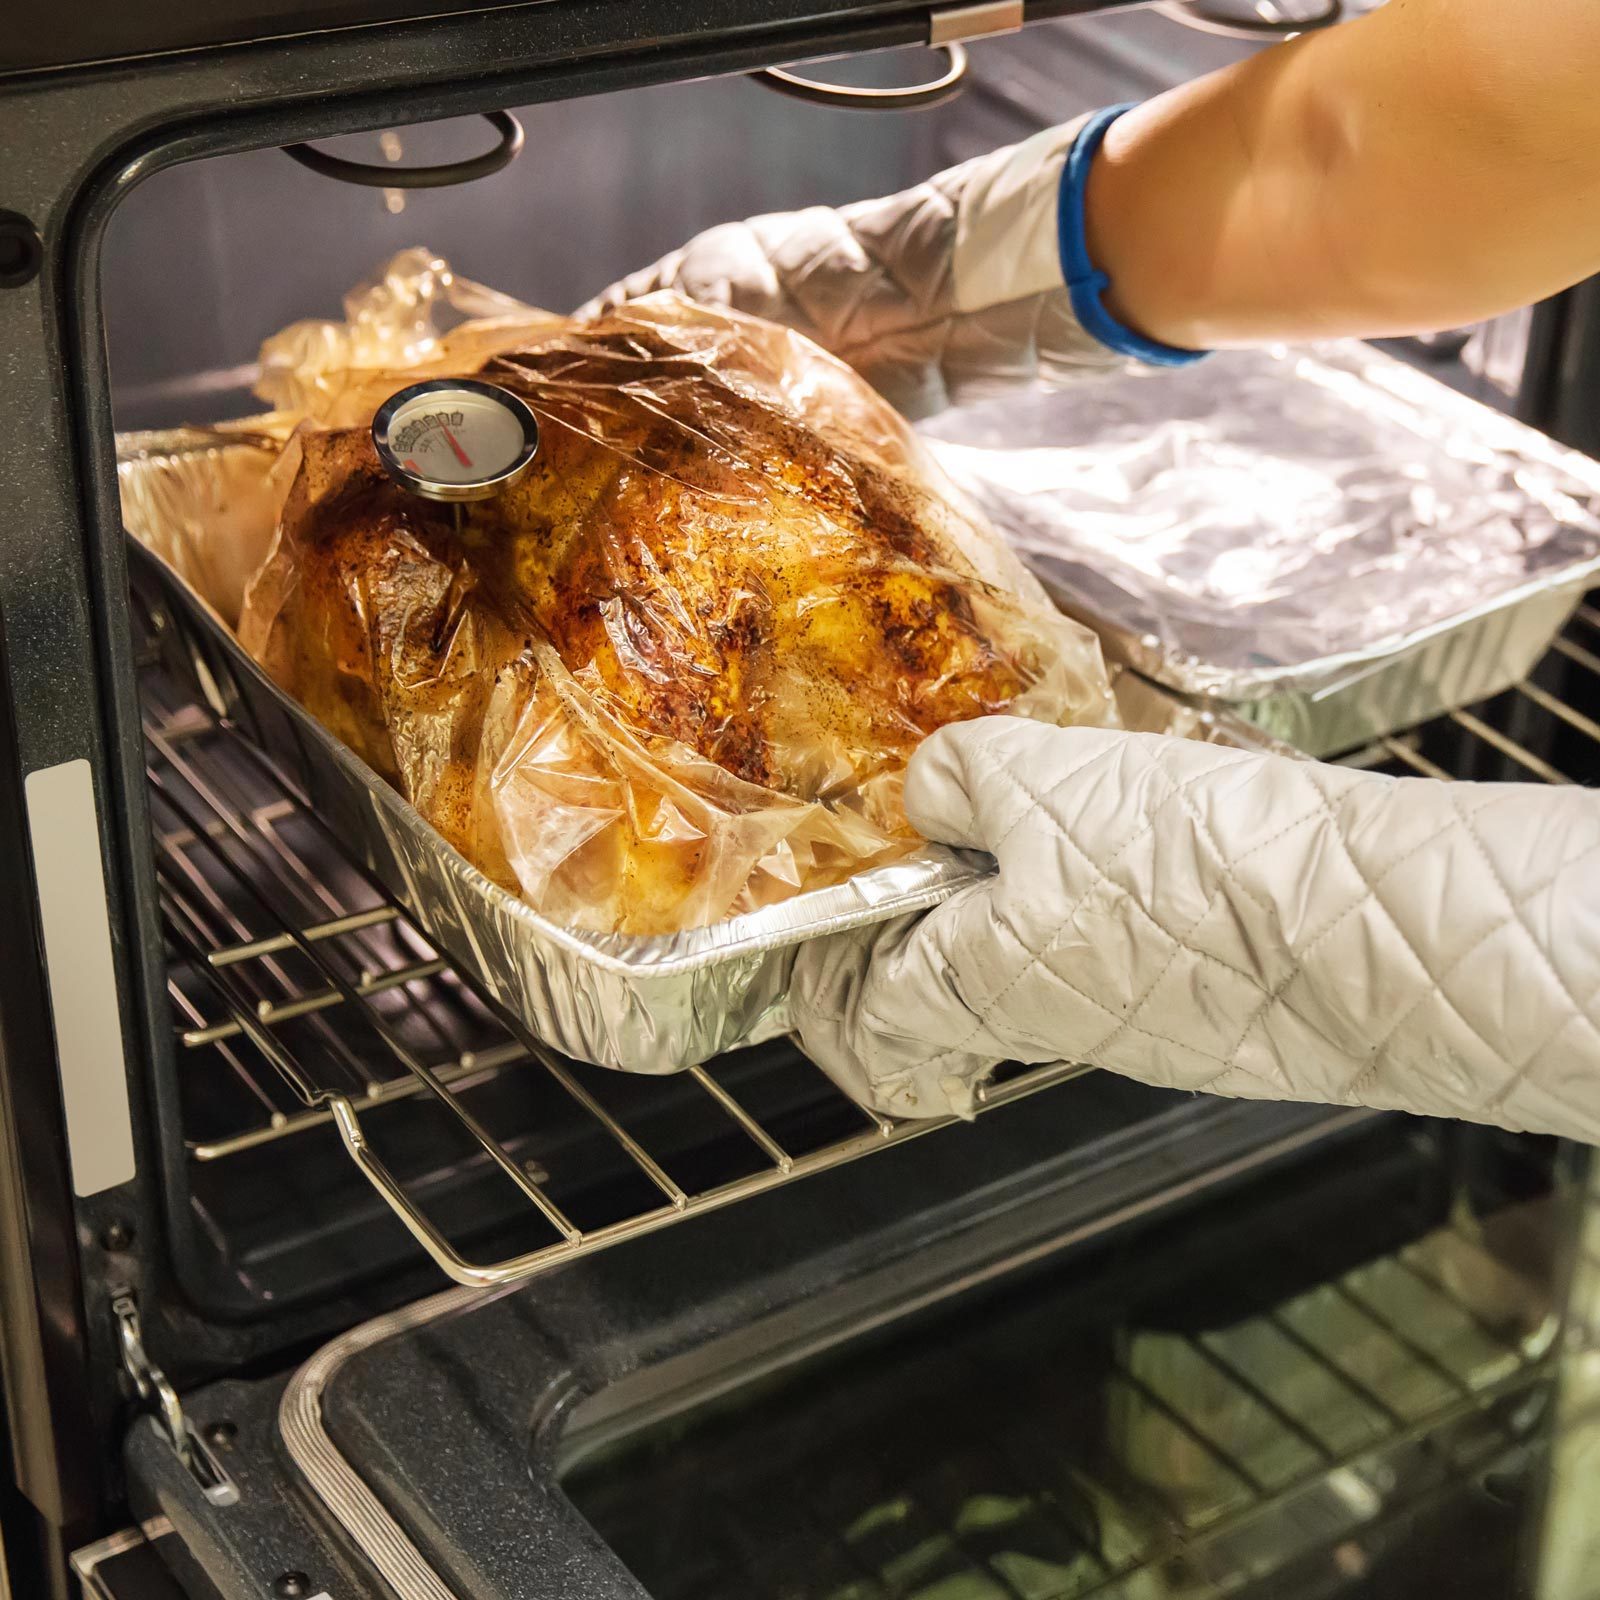 Reynolds Turkey Oven Bags - Perfect Turkey Every Time